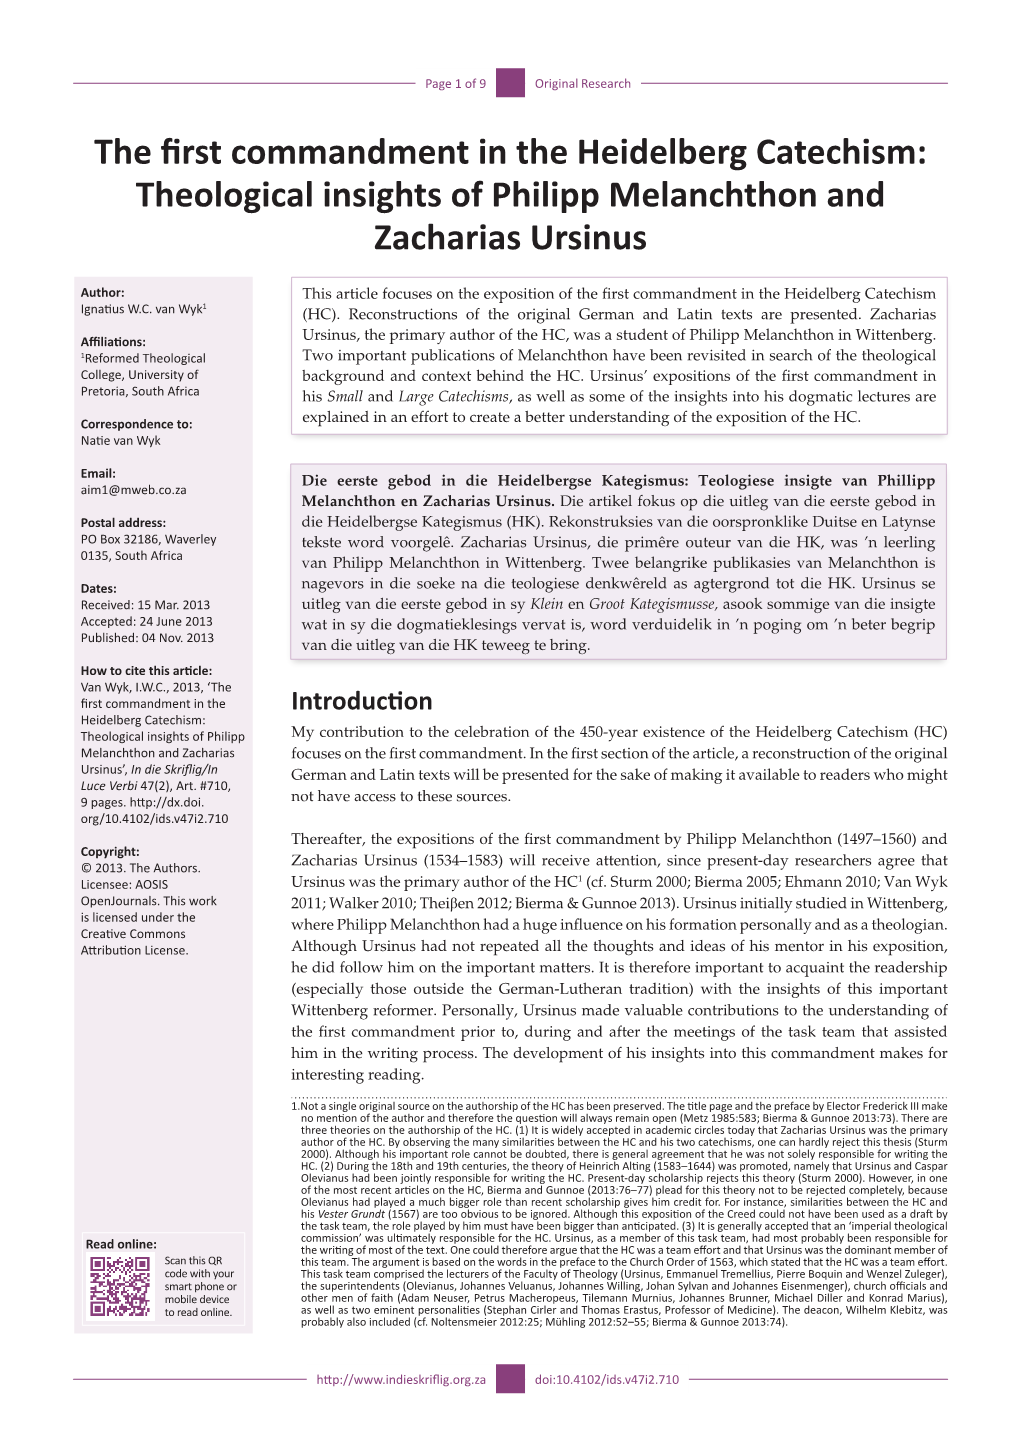 Theological Insights of Philipp Melanchthon and Zacharias Ursinus